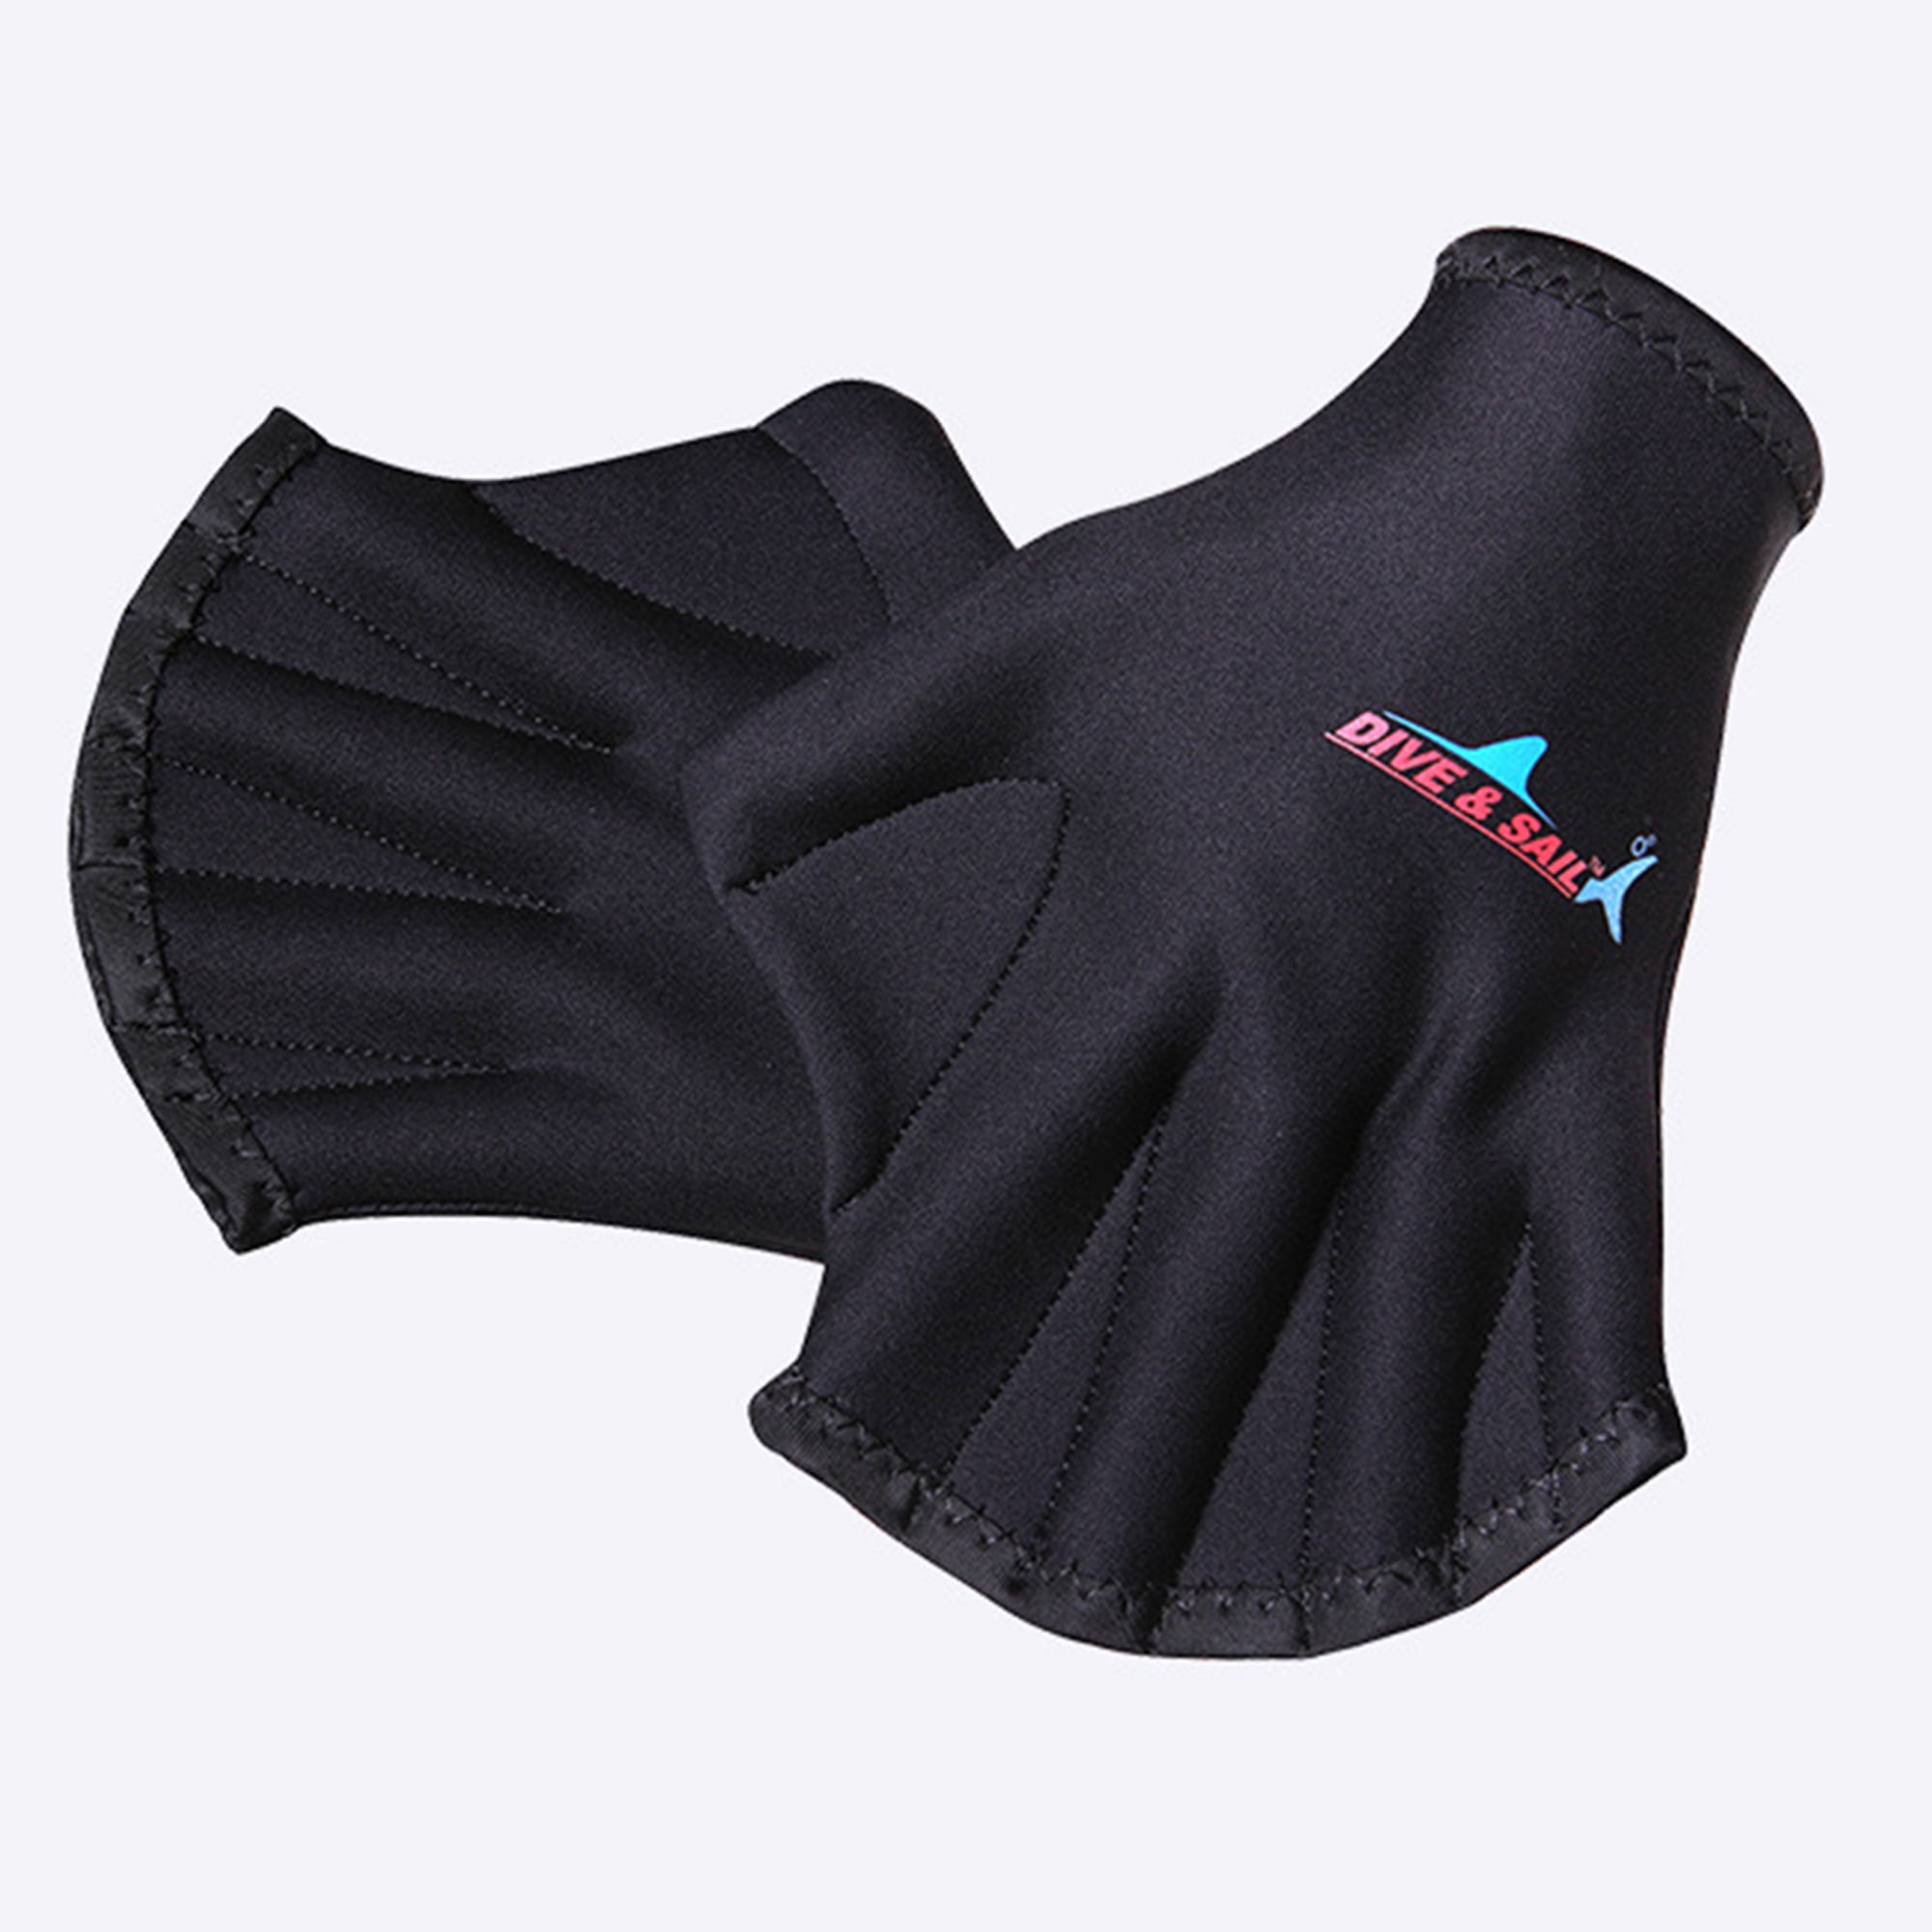 Lx10tqy 1 Pair Comfortable Swimming Hand Palm Fins Flippers Webbed Training Diving Gloves Swim Gear Black S